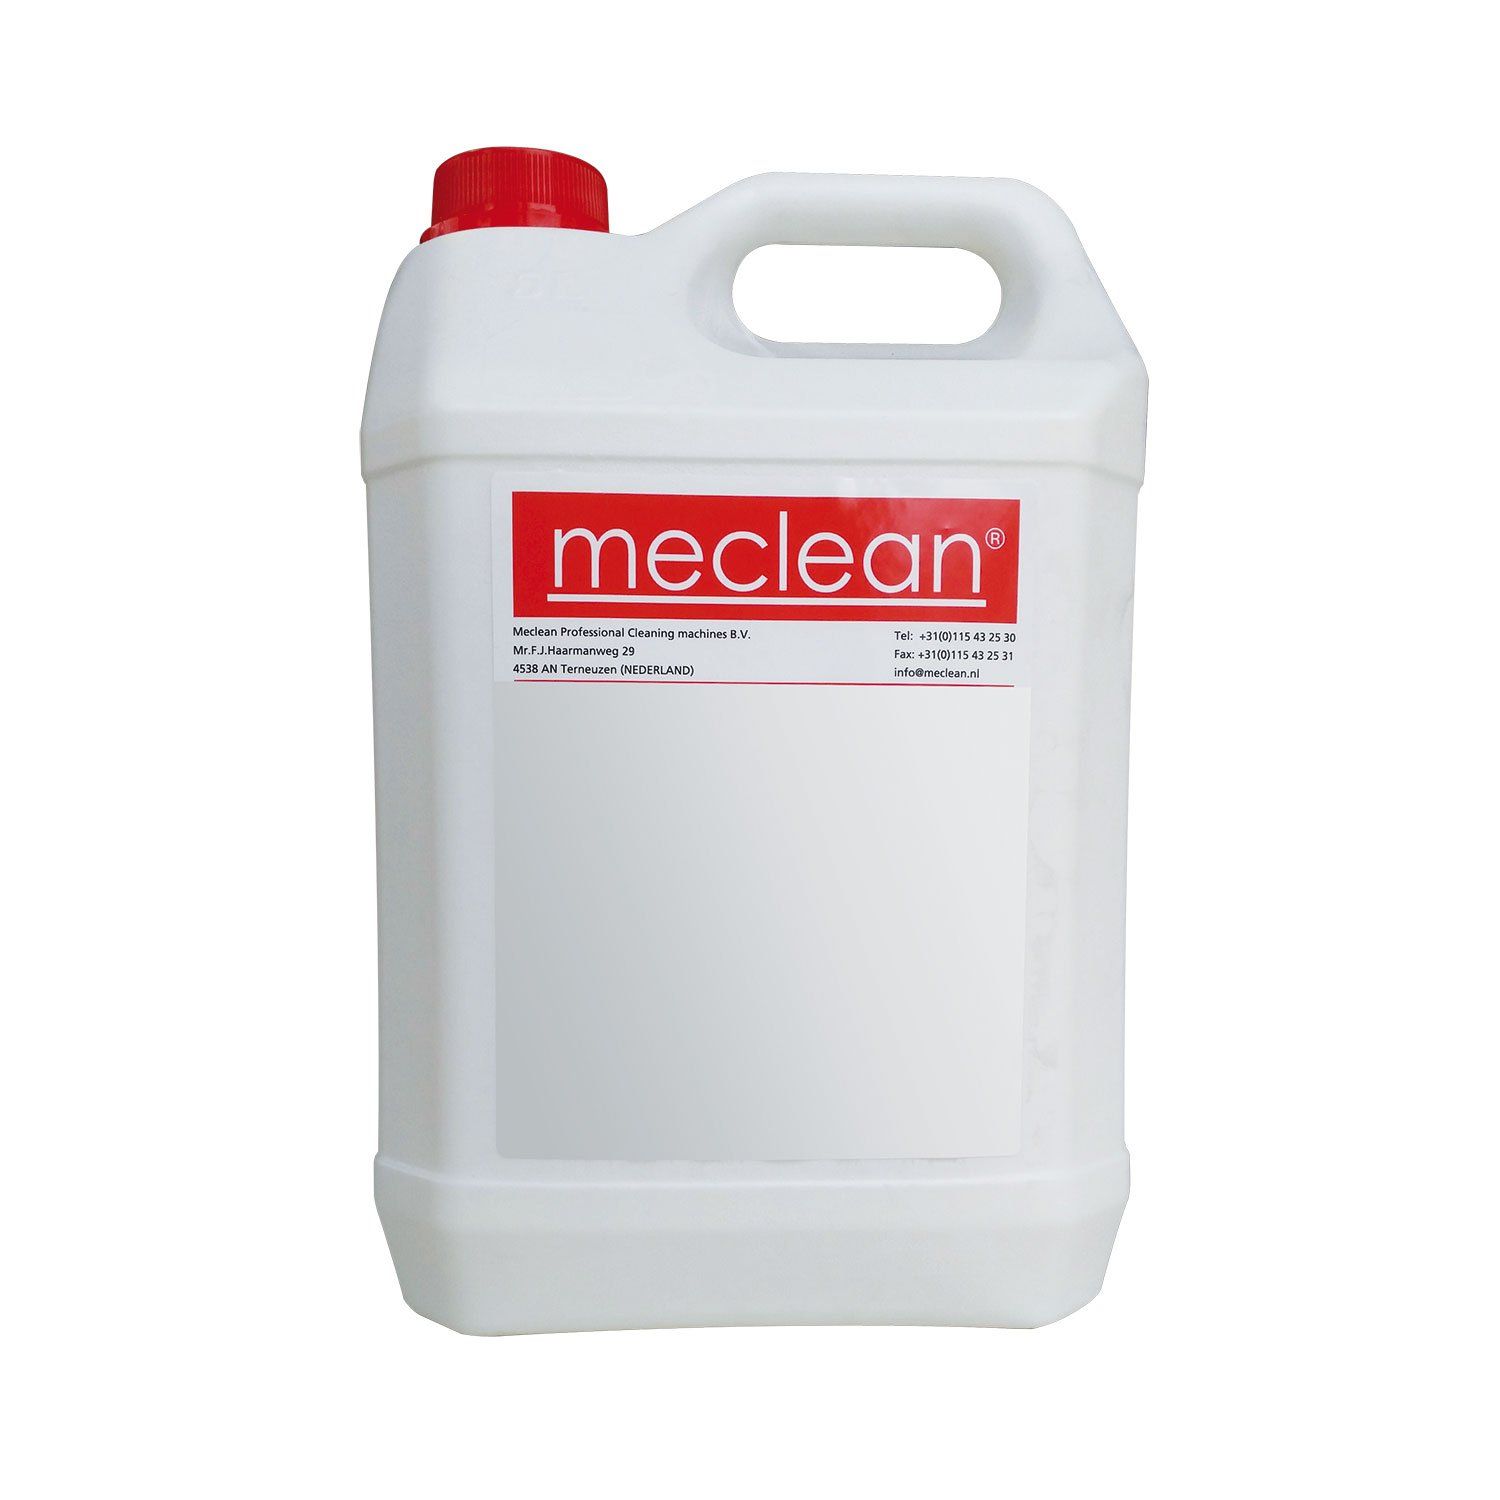 Meclean cleaning agent for pressure washer Stone Preserve